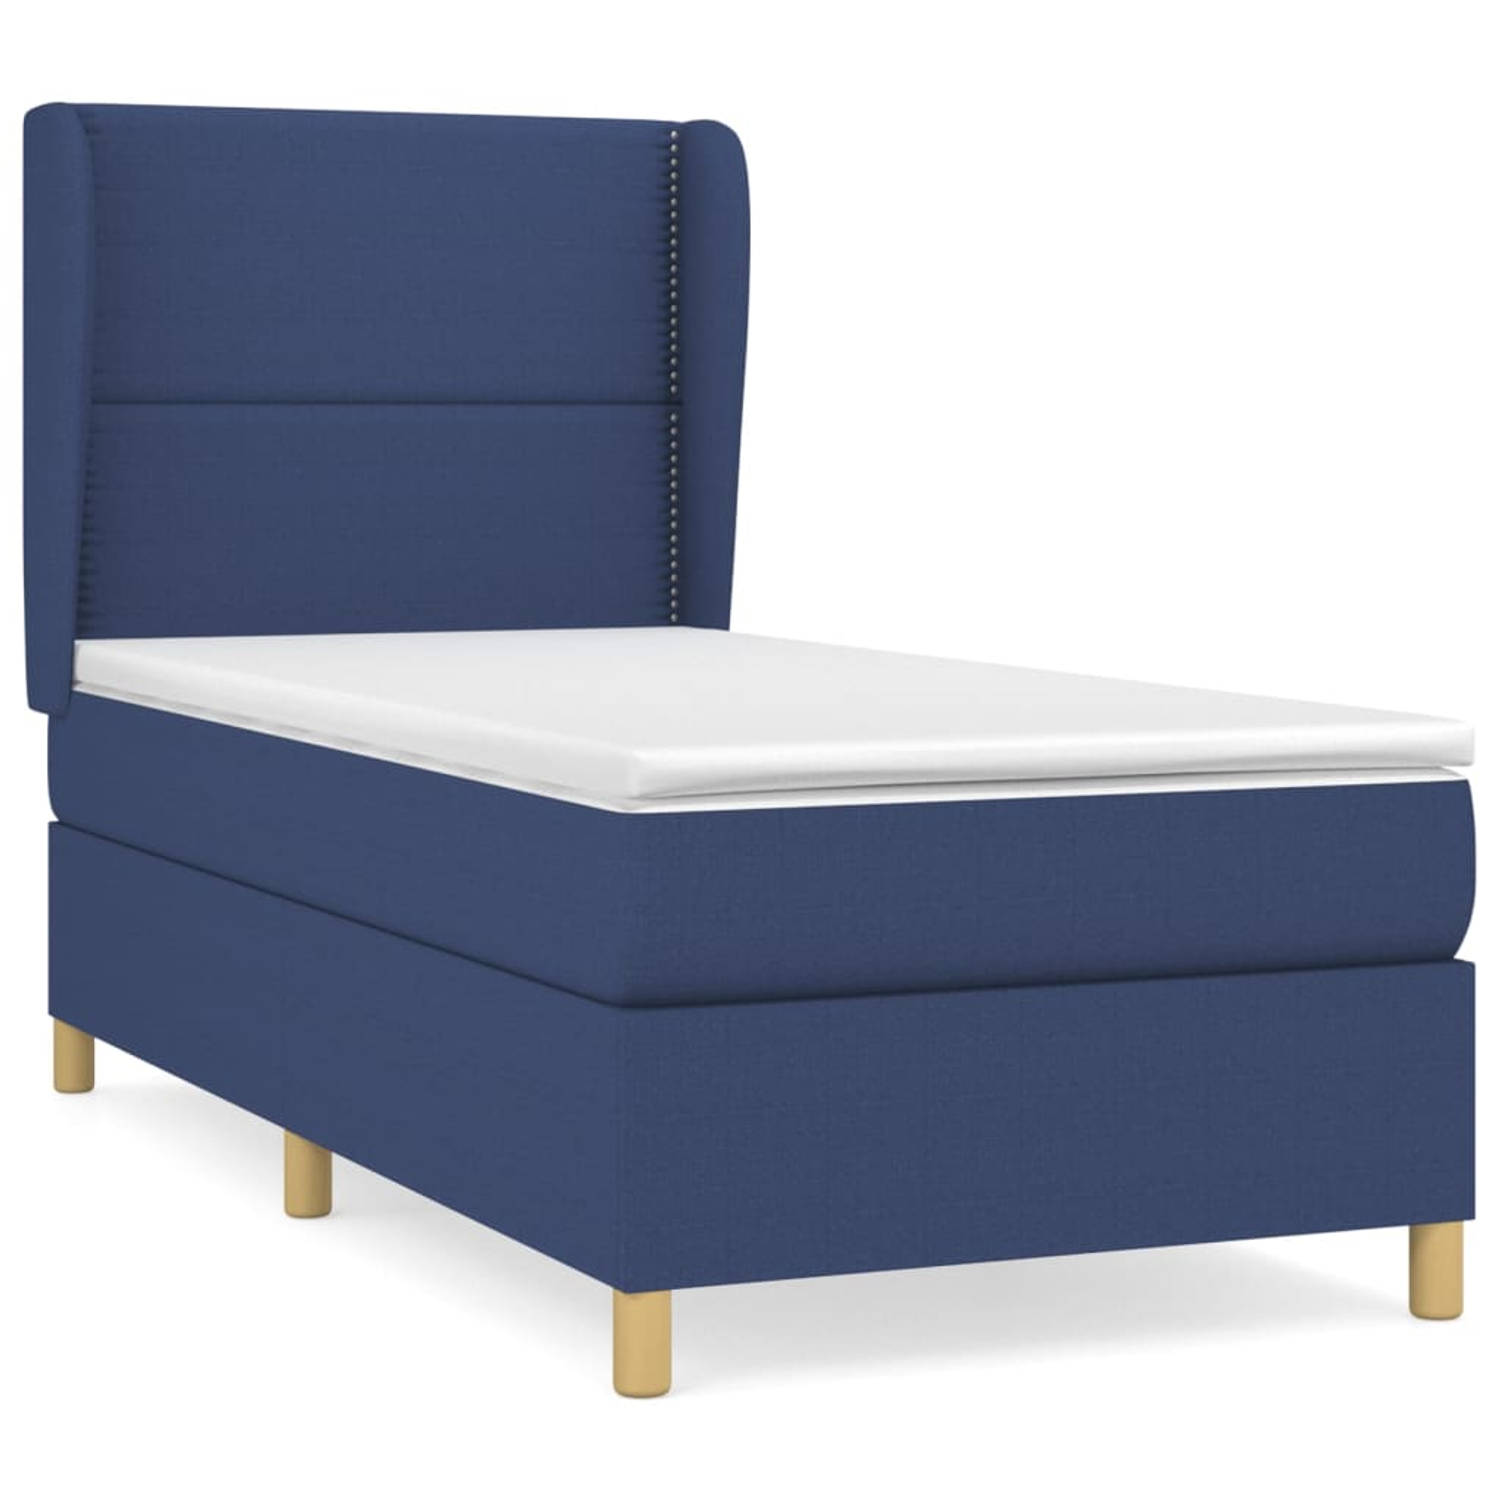 The Living Store Boxspringbed - Comfort - Bed - Afmeting- 203 x 83 x 118/128 cm - Ken- Duurzaam materiaal